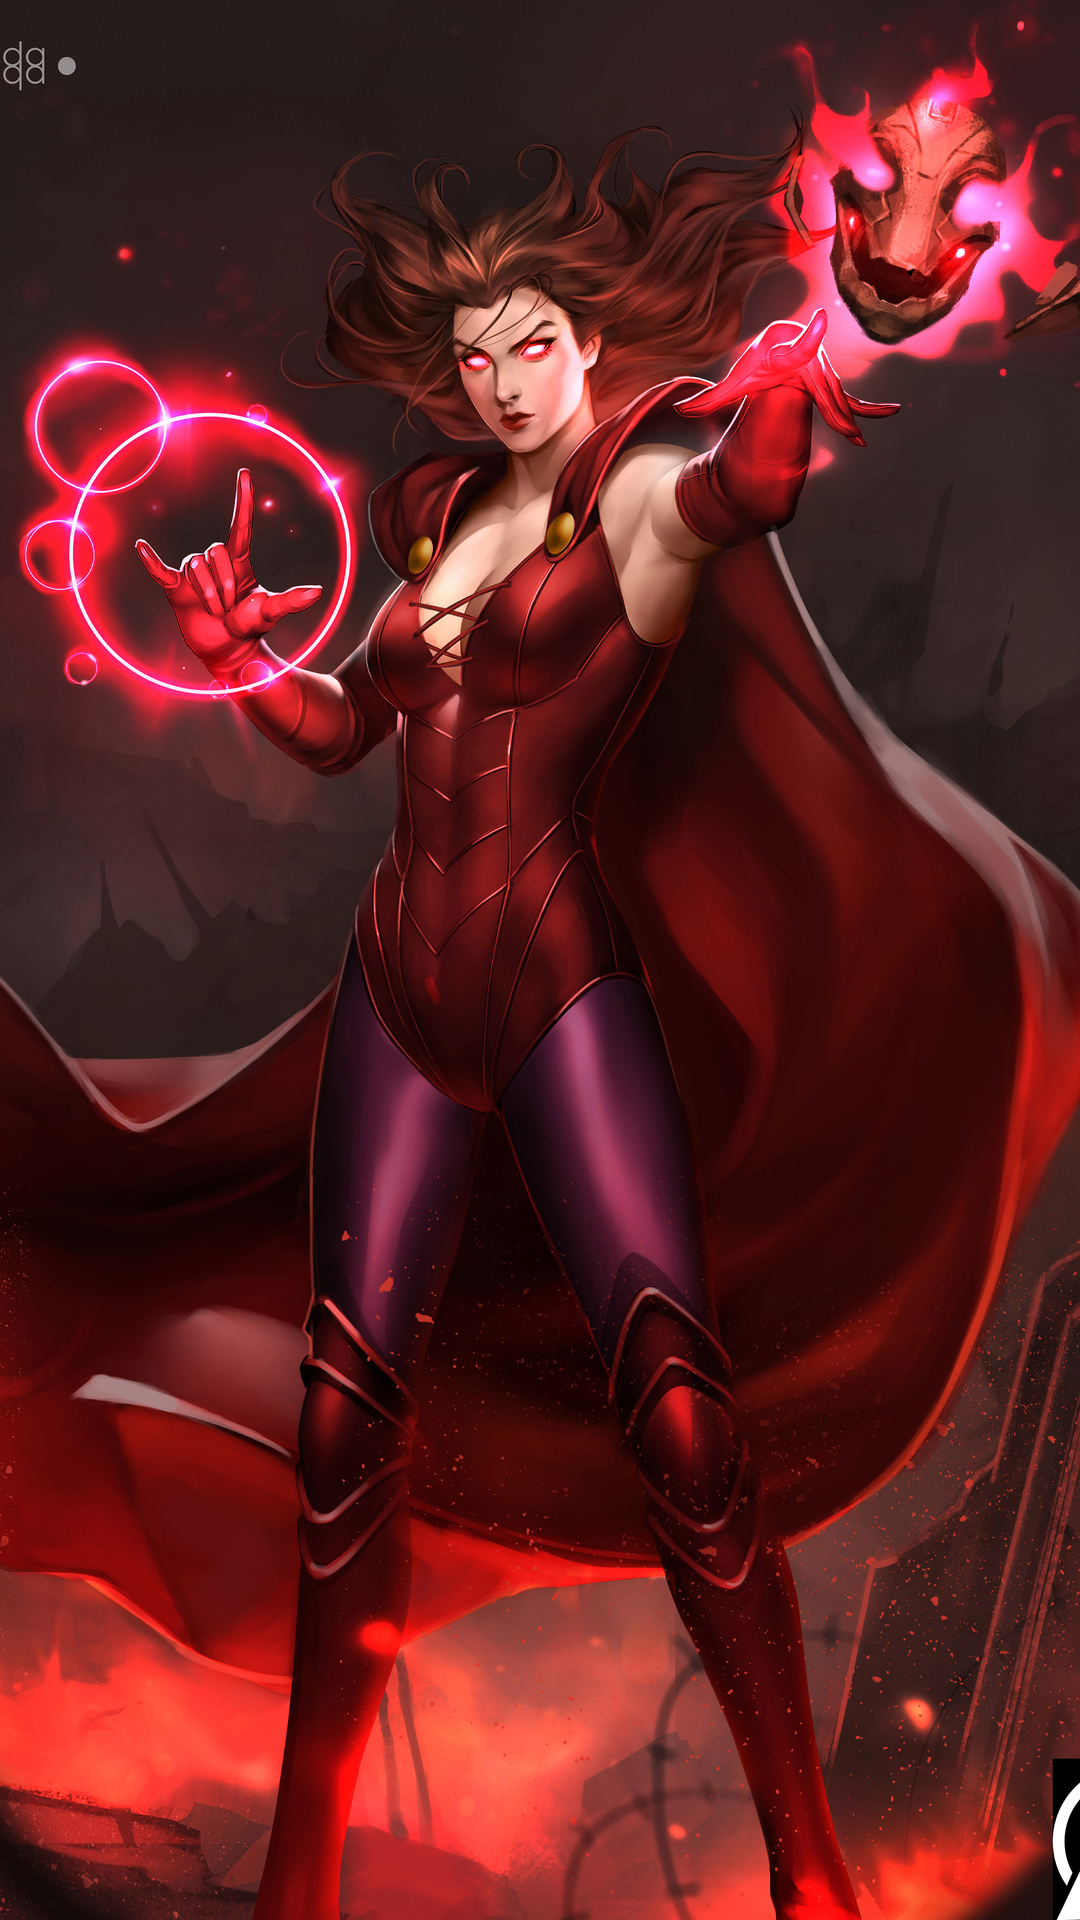 1080x1920 scarlet witch, hd, superheroes, behance, artwork for iPhone 8 wallpaper